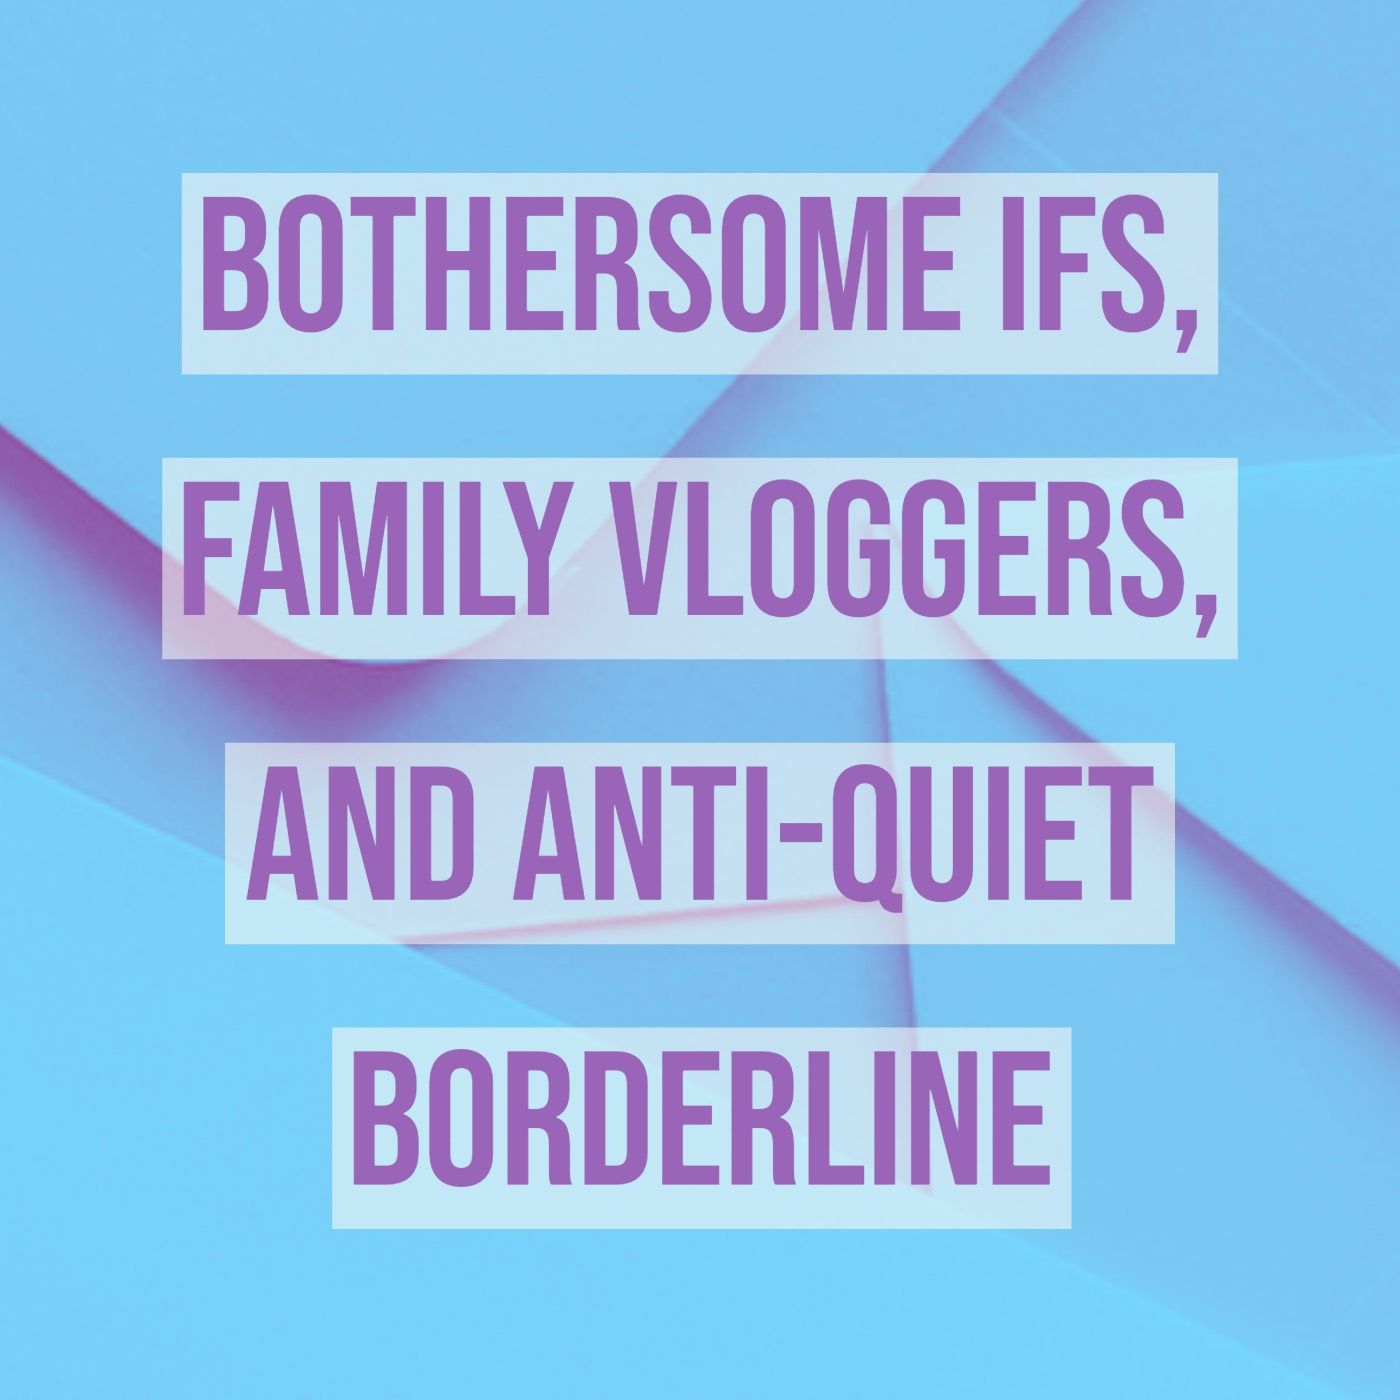 Bothersome IFS, Family Vloggers, and Anti-Quiet Borderline